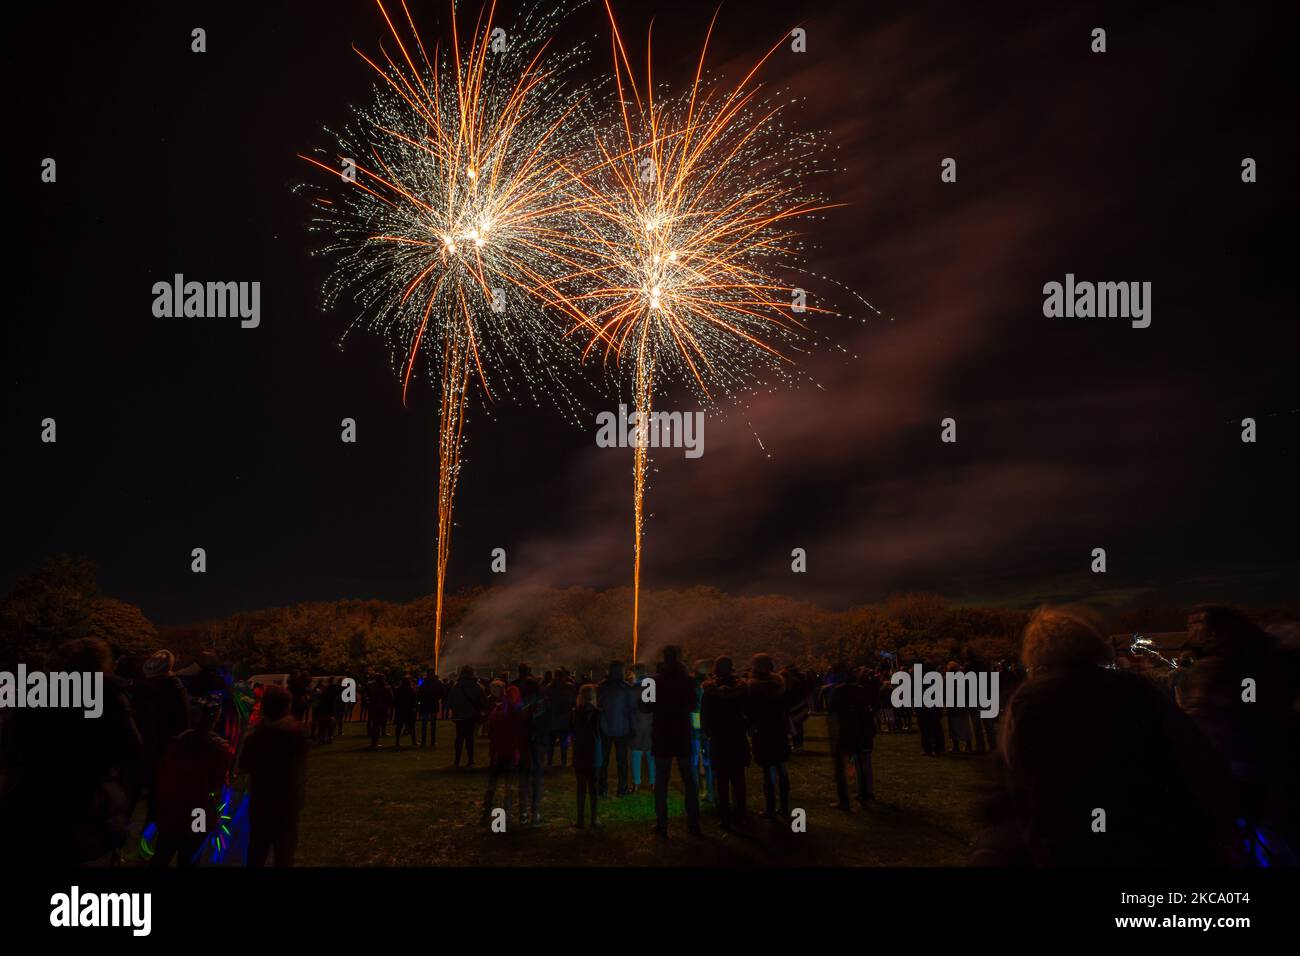 Pembury, Tunbridge Wells, UK. 04 November 2022. A village firework display on the recreation ground, free for residents, and hosted by Pembury Parish Council. The crowds gather for this free event to mark the start of bonfire season and Guy Fawkes Night. ©Sarah Mott / Alamy Live News. Stock Photo